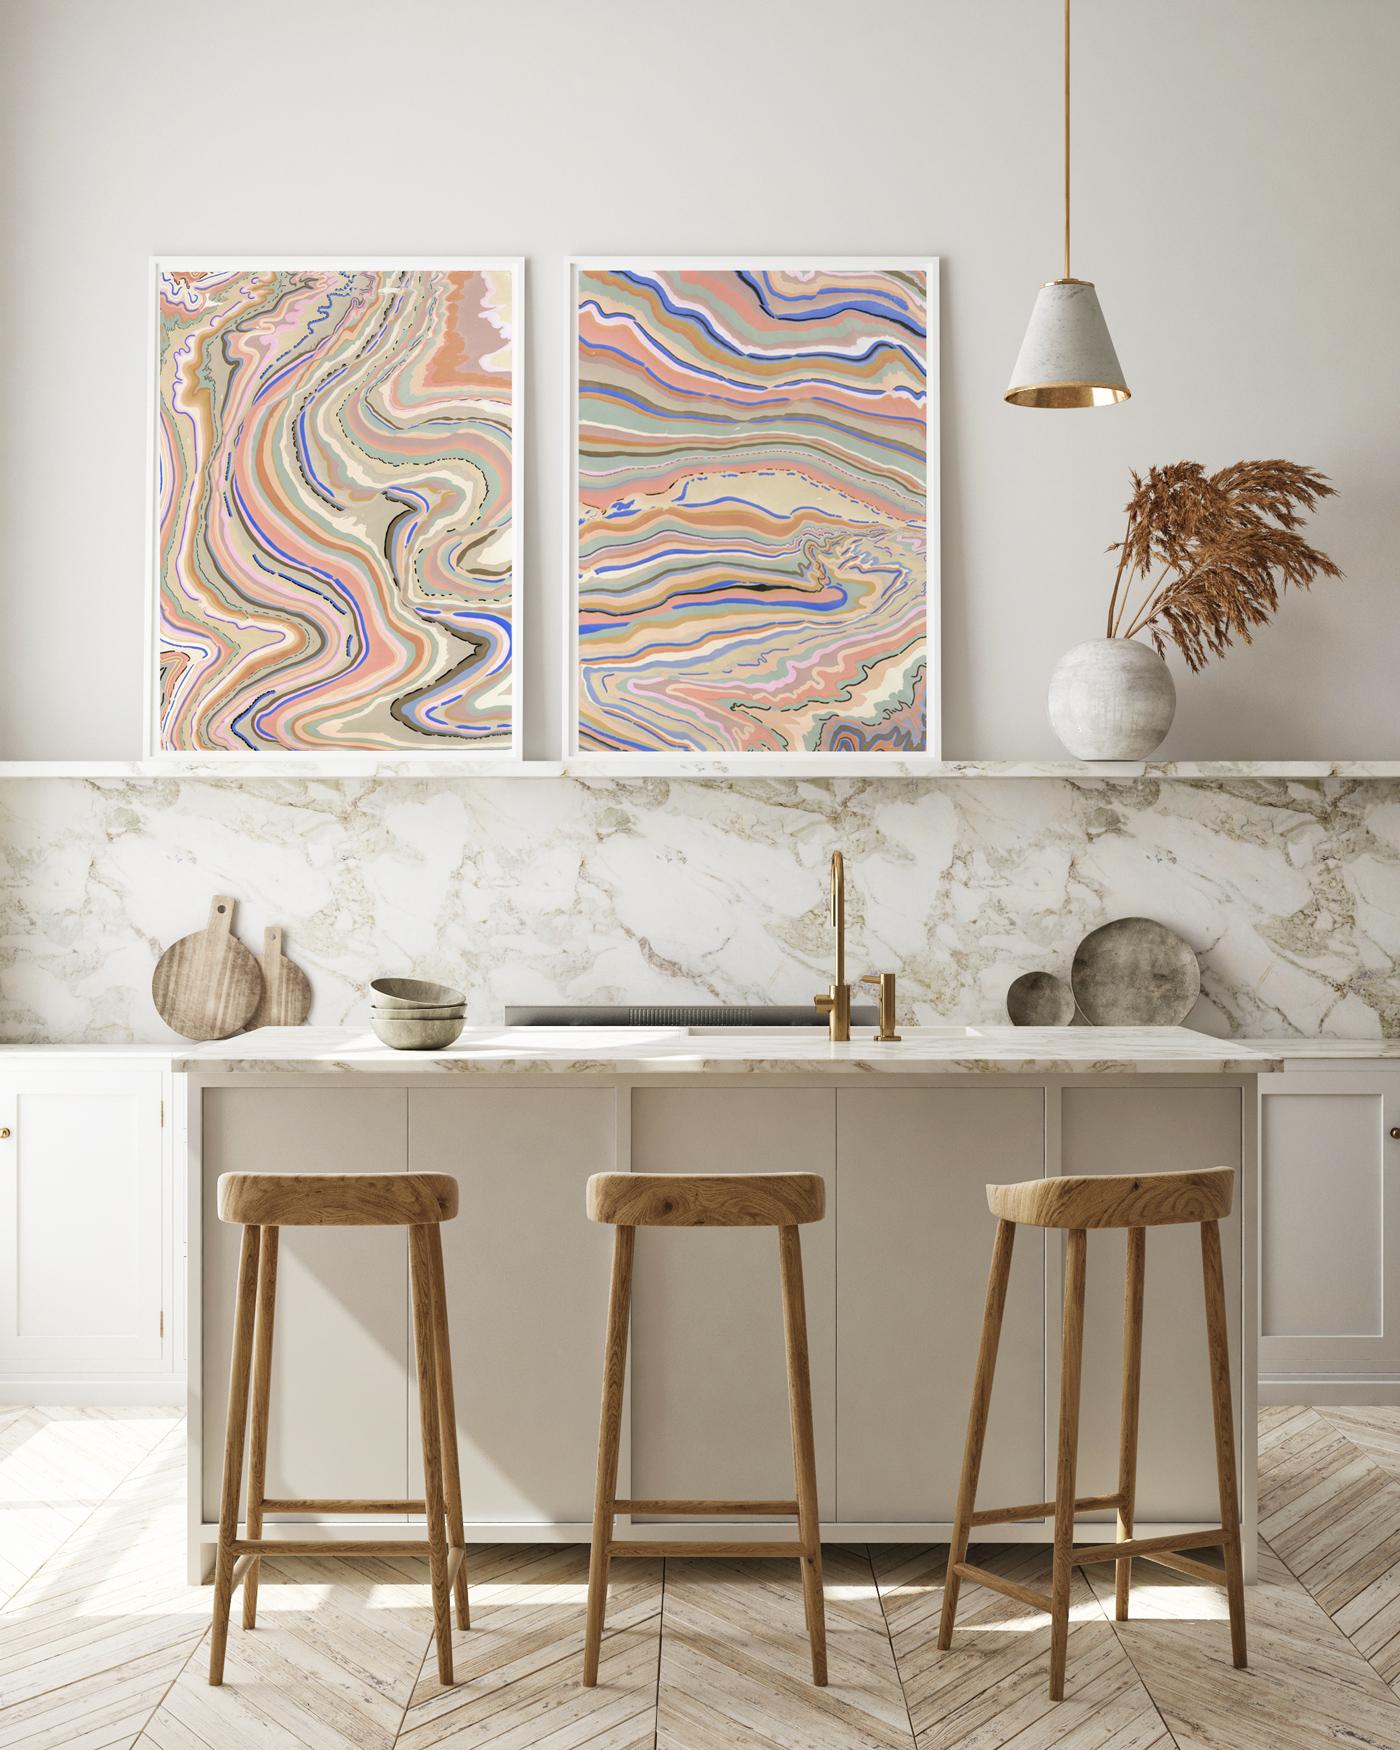 Danish artist Pernille Snedker’s unique marbling artwork—delicately weaving vibrant colored stripes into an intricate composition.
The piece harmoniously blends shades of blue with subtle hints of black, sand, lilac, light blue, salmon, and